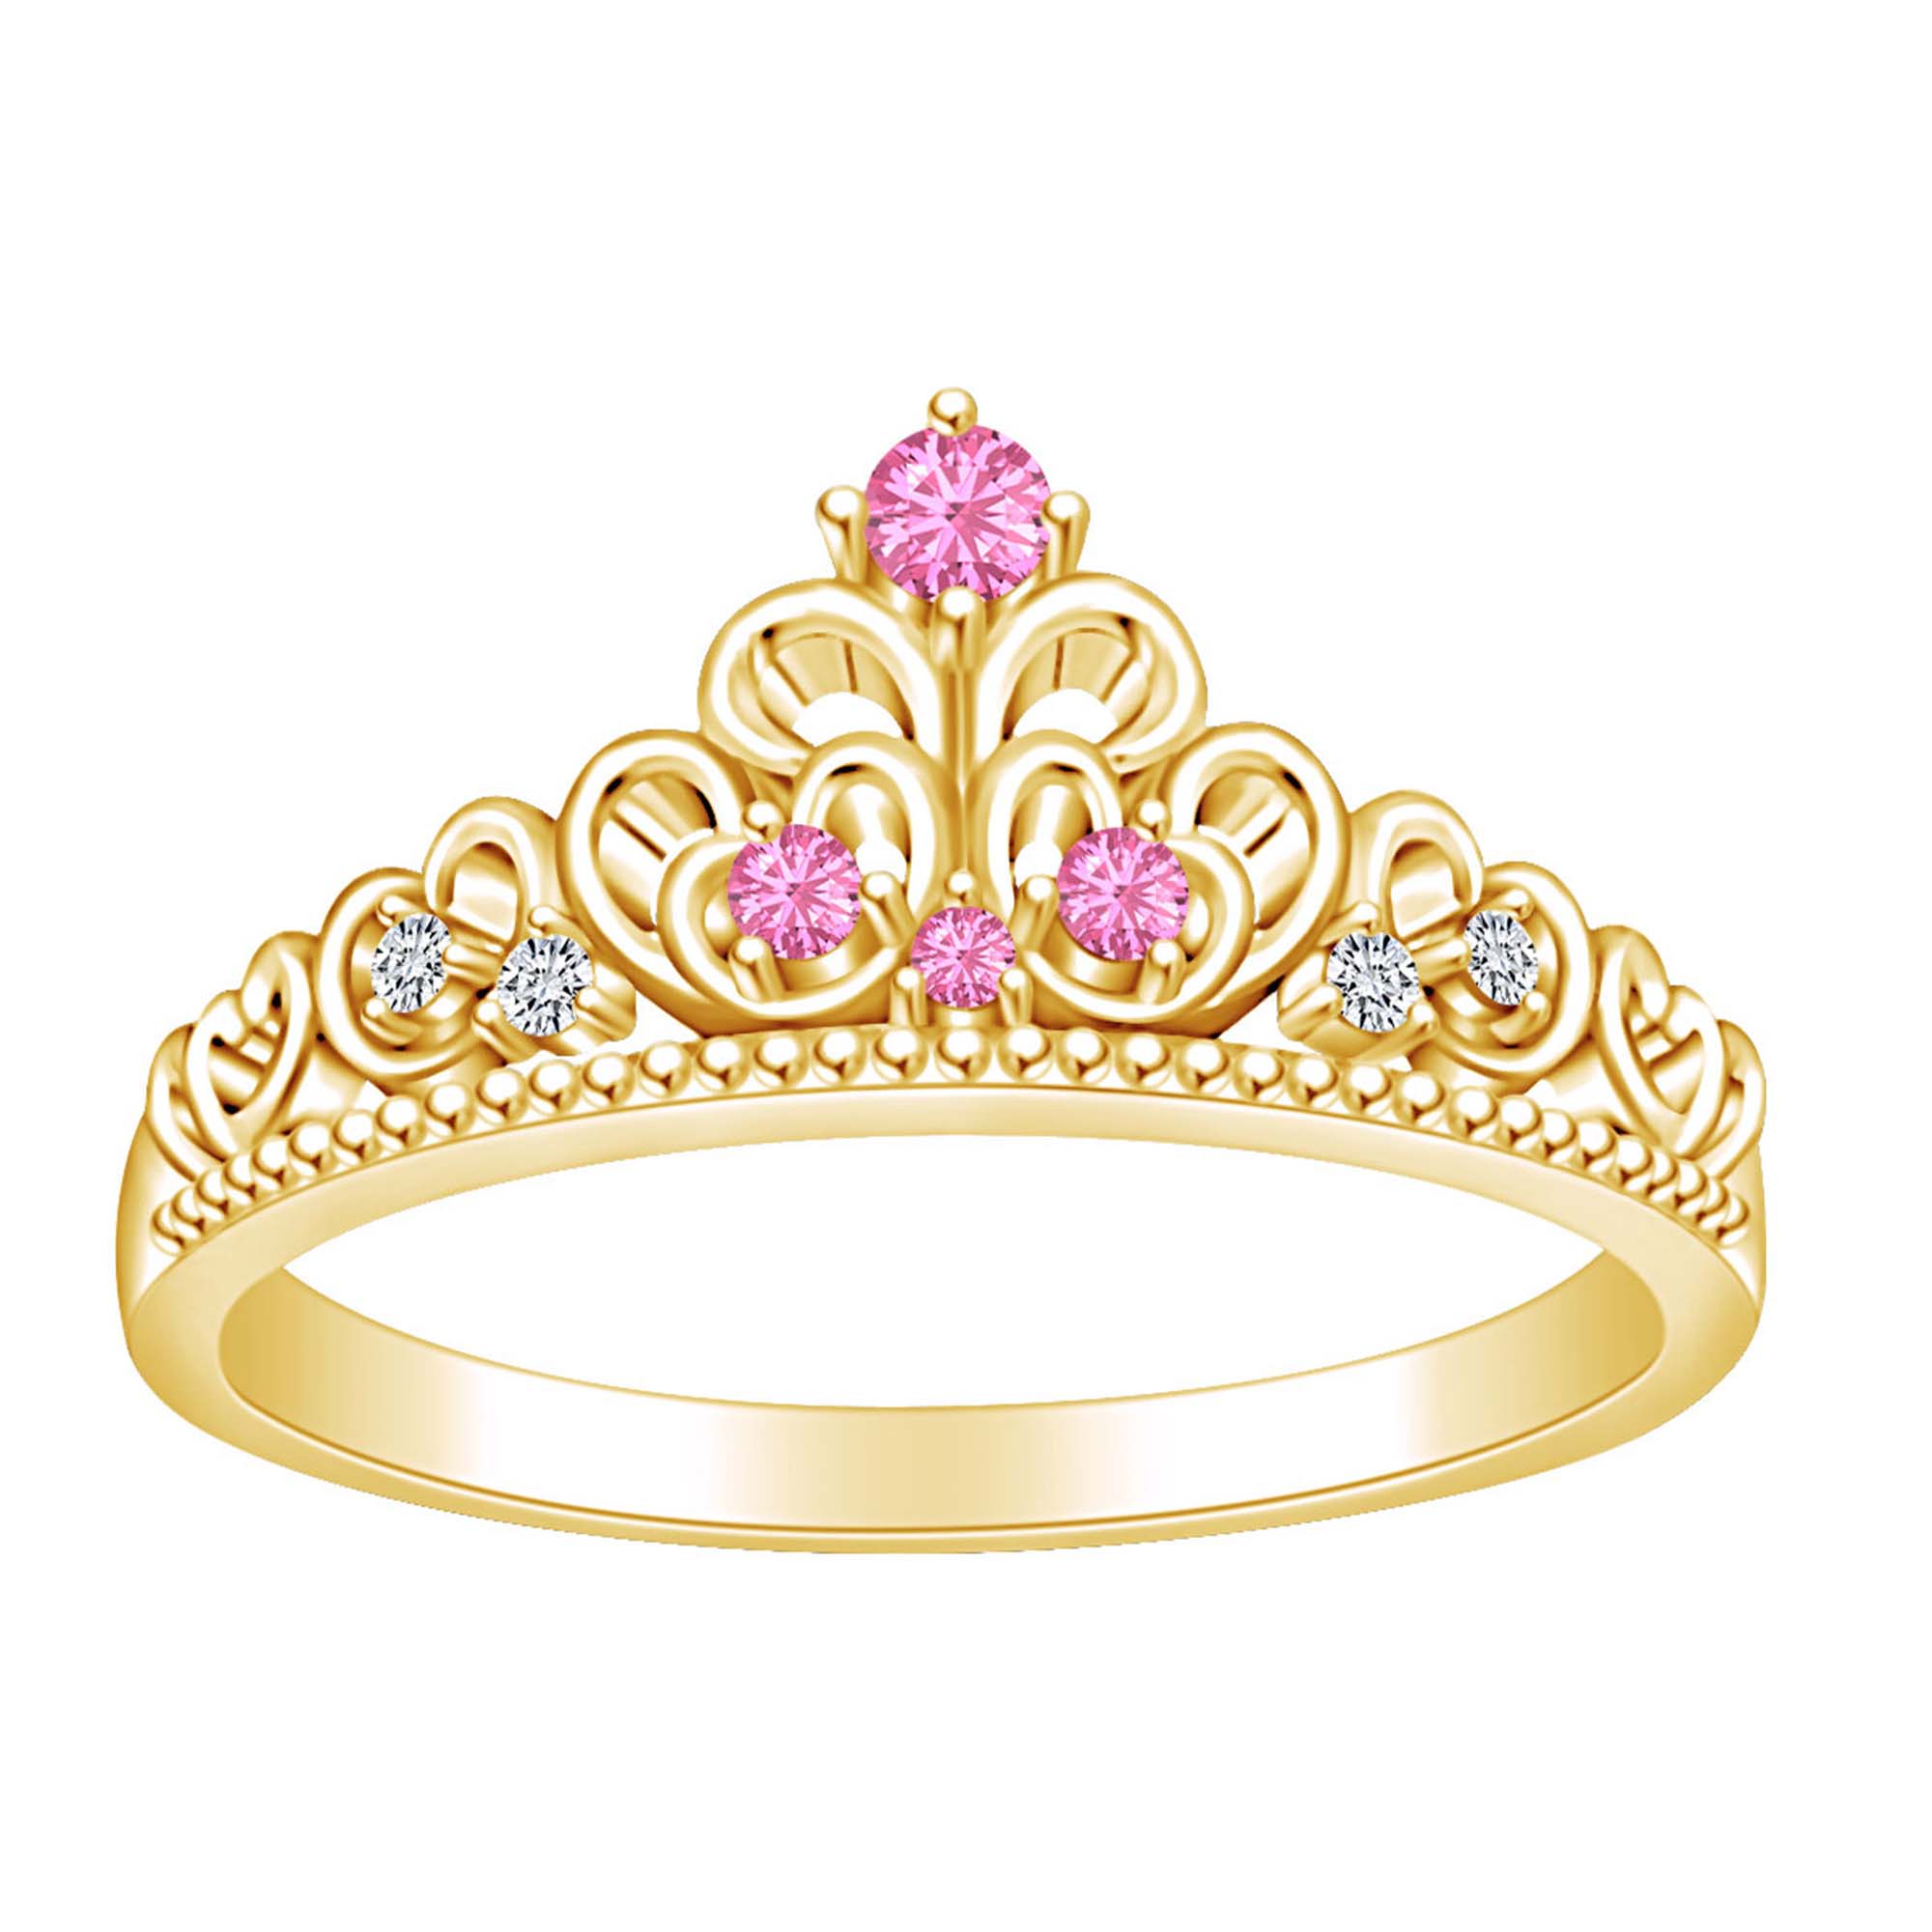 Simulated Pink Tourmaline & White Cubic Zirconia Crown Wedding Band Ring In 14k Yellow Gold Over Sterling Silver Ring Size-9